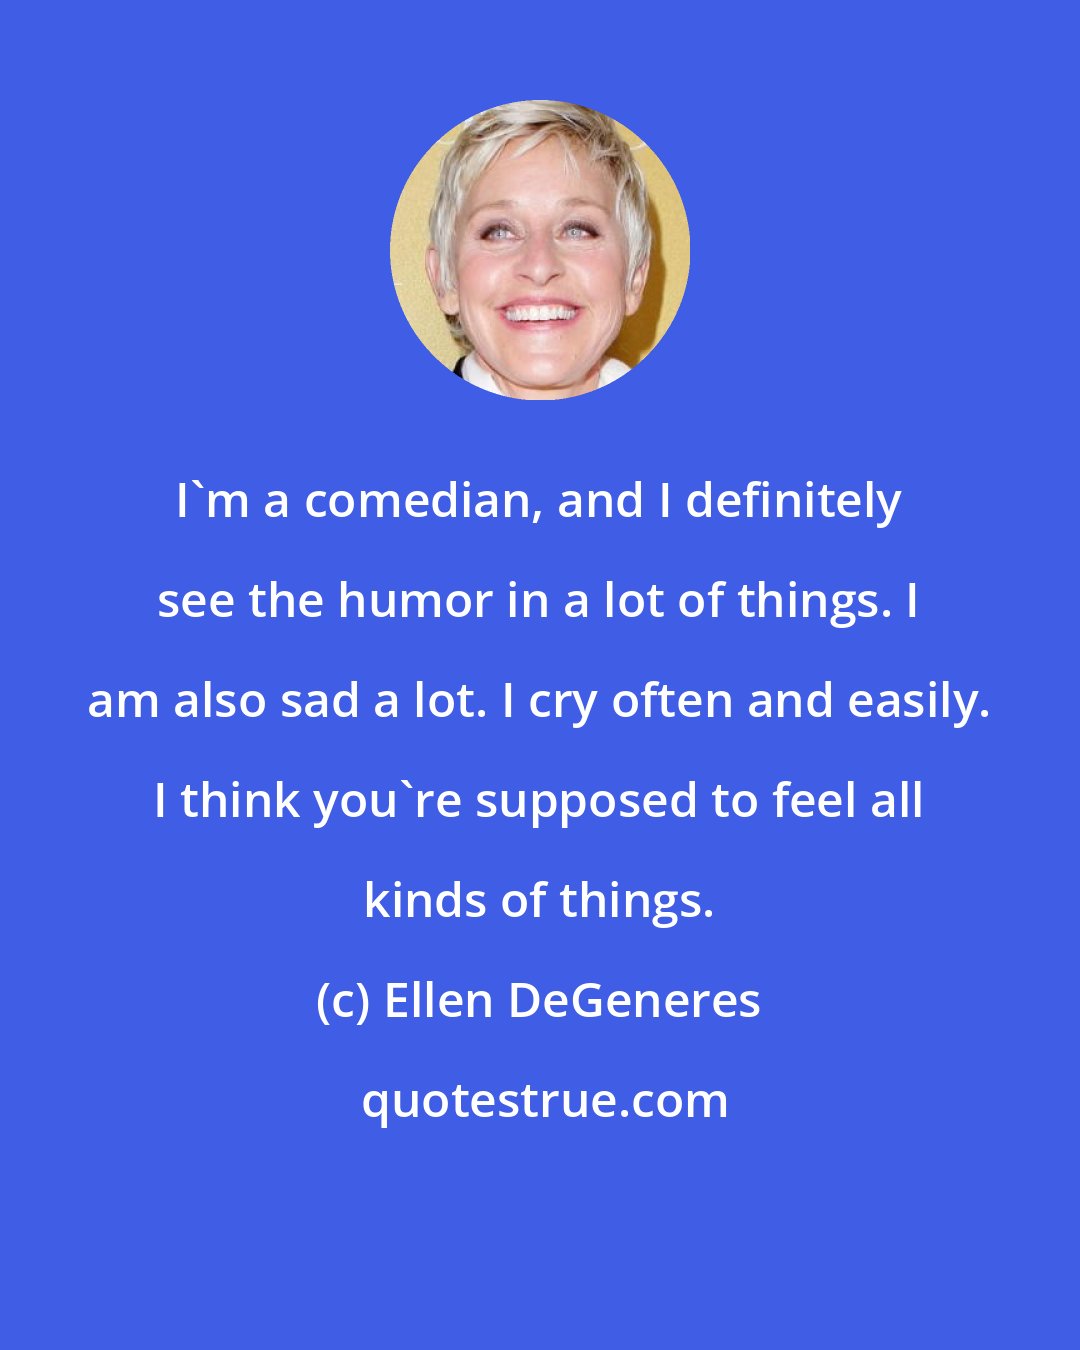 Ellen DeGeneres: I'm a comedian, and I definitely see the humor in a lot of things. I am also sad a lot. I cry often and easily. I think you're supposed to feel all kinds of things.